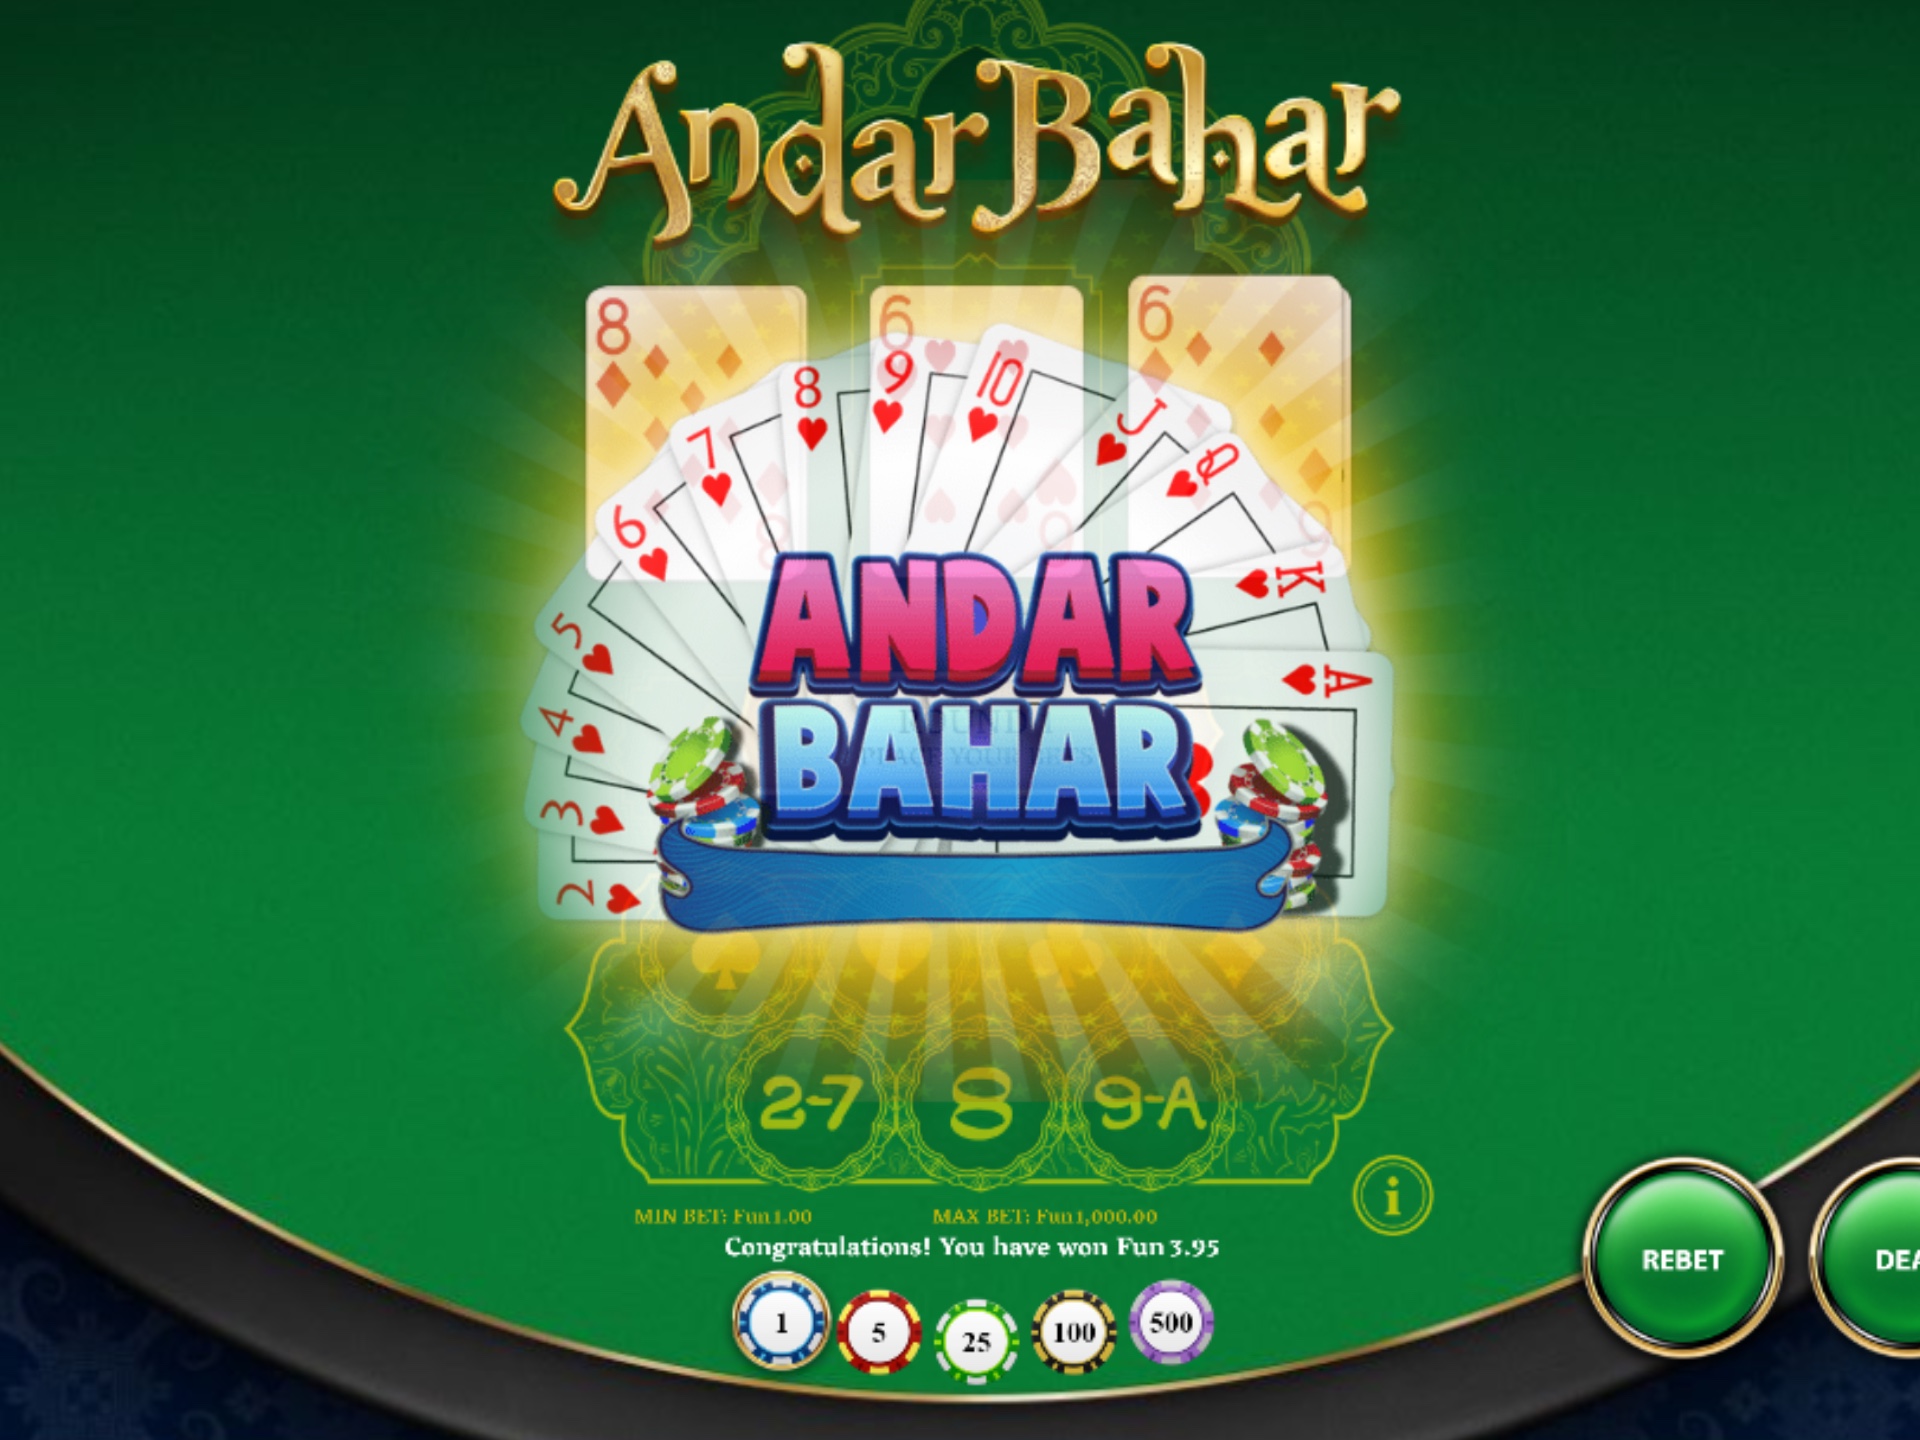 How to play andar bahar step by step guide 2021